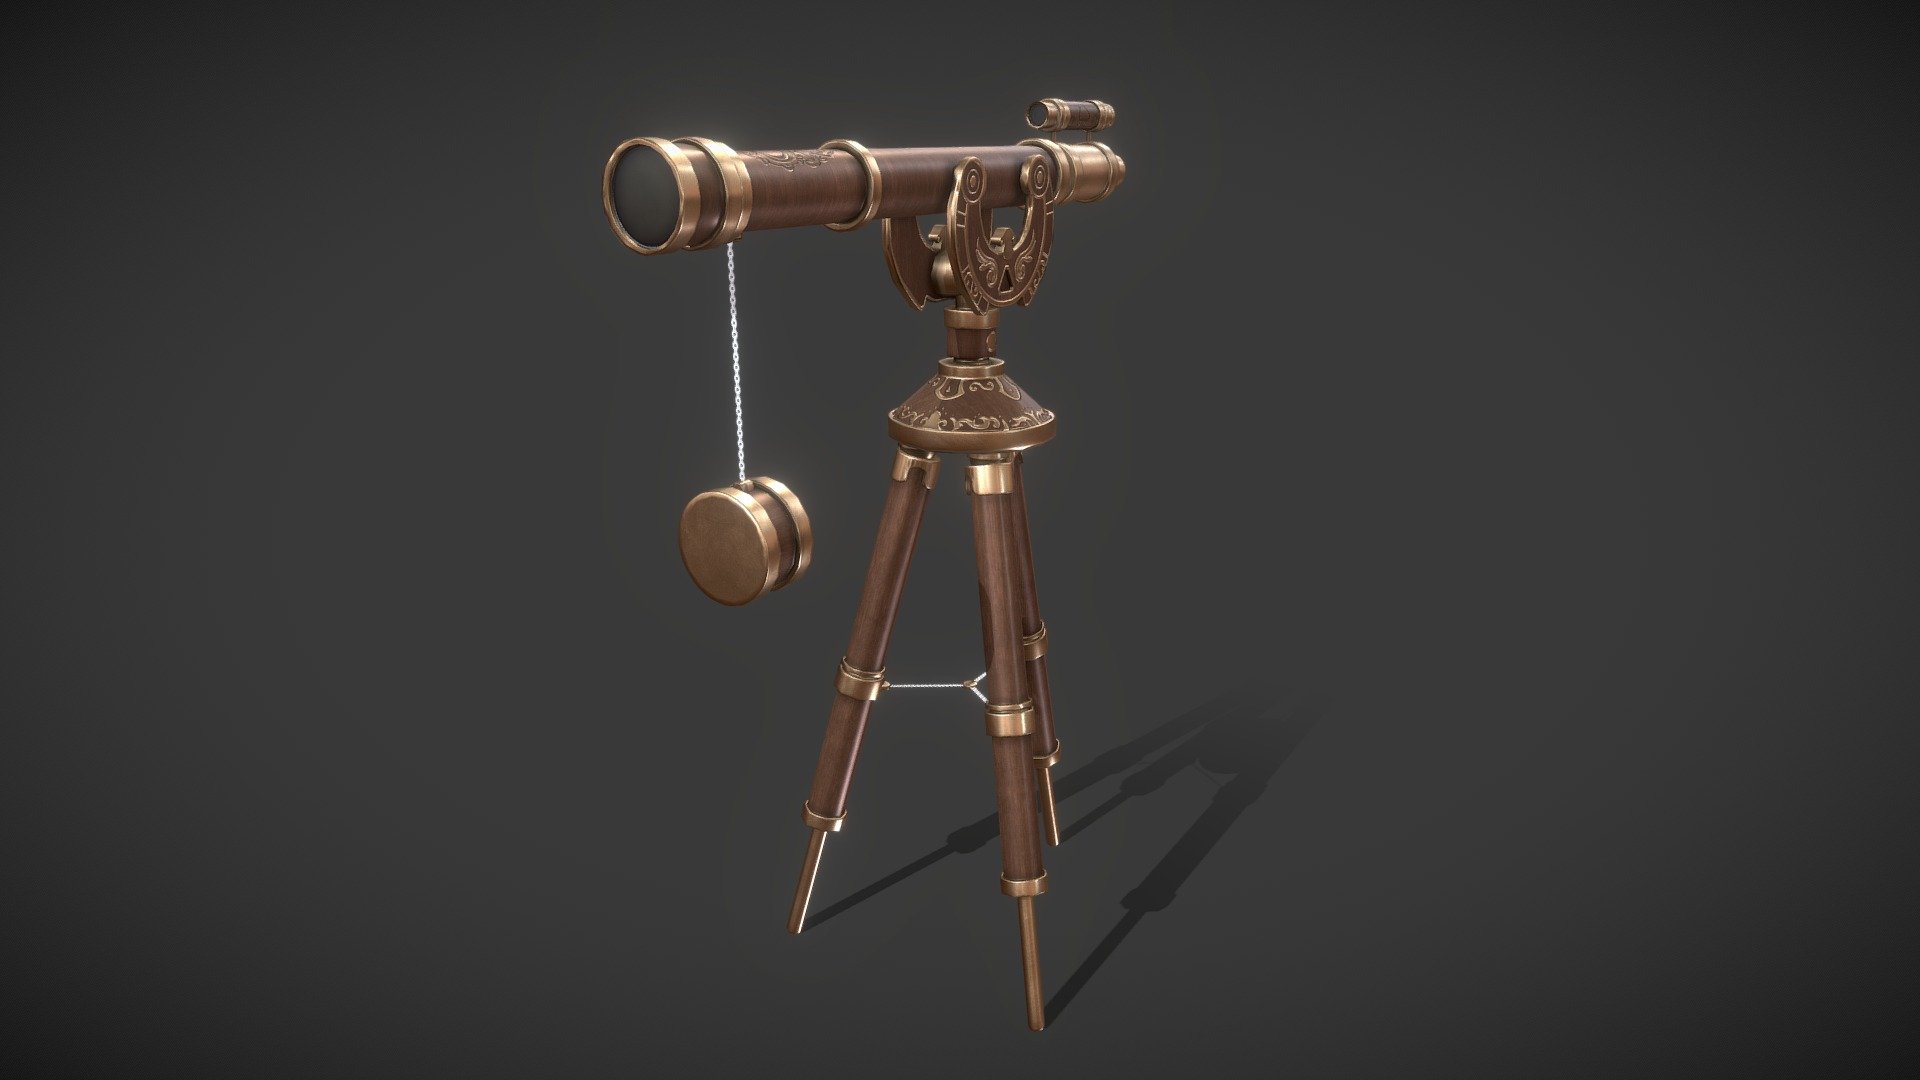 Classic decorative style telescope with tripod stand.

Telescope tube can be rotated freely in horizontal and vertical directions.

Double sided mesh for chain

Polycount: 5306 Triangles

PNG Texture sizes:

Telescope: 2048 x 2048 (Include Albedo, Normal, Specular and AO)

Chain: 1024 x 1024 Albedo 

Lens: 512 x 512 Normal - Decor Telescope - Buy Royalty Free 3D model by Experience Lab Art (@Experience_Lab_Art) 3d model